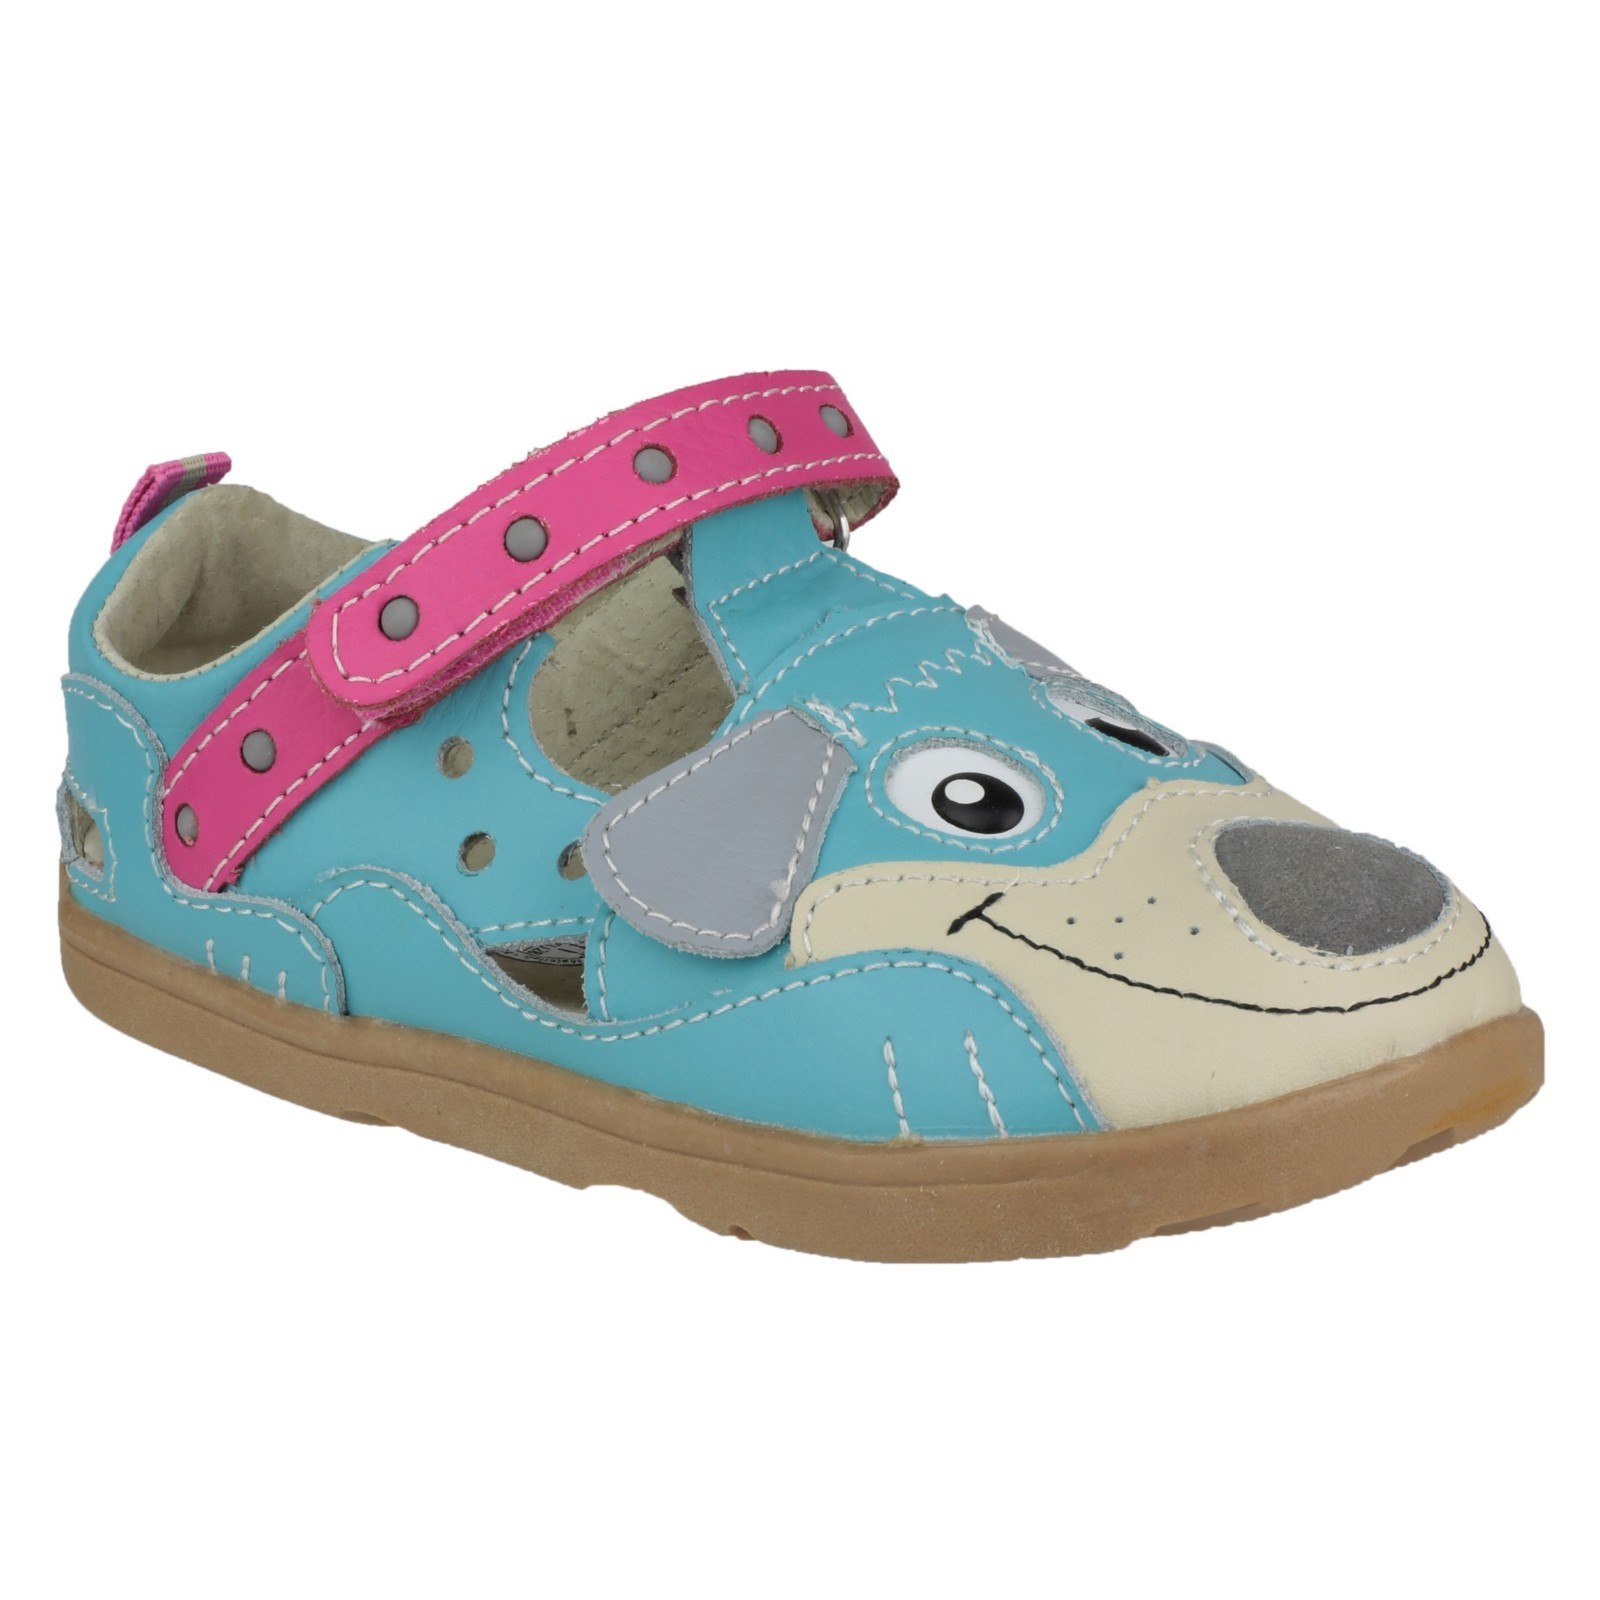 Sparky The Puppy Girls Shoes